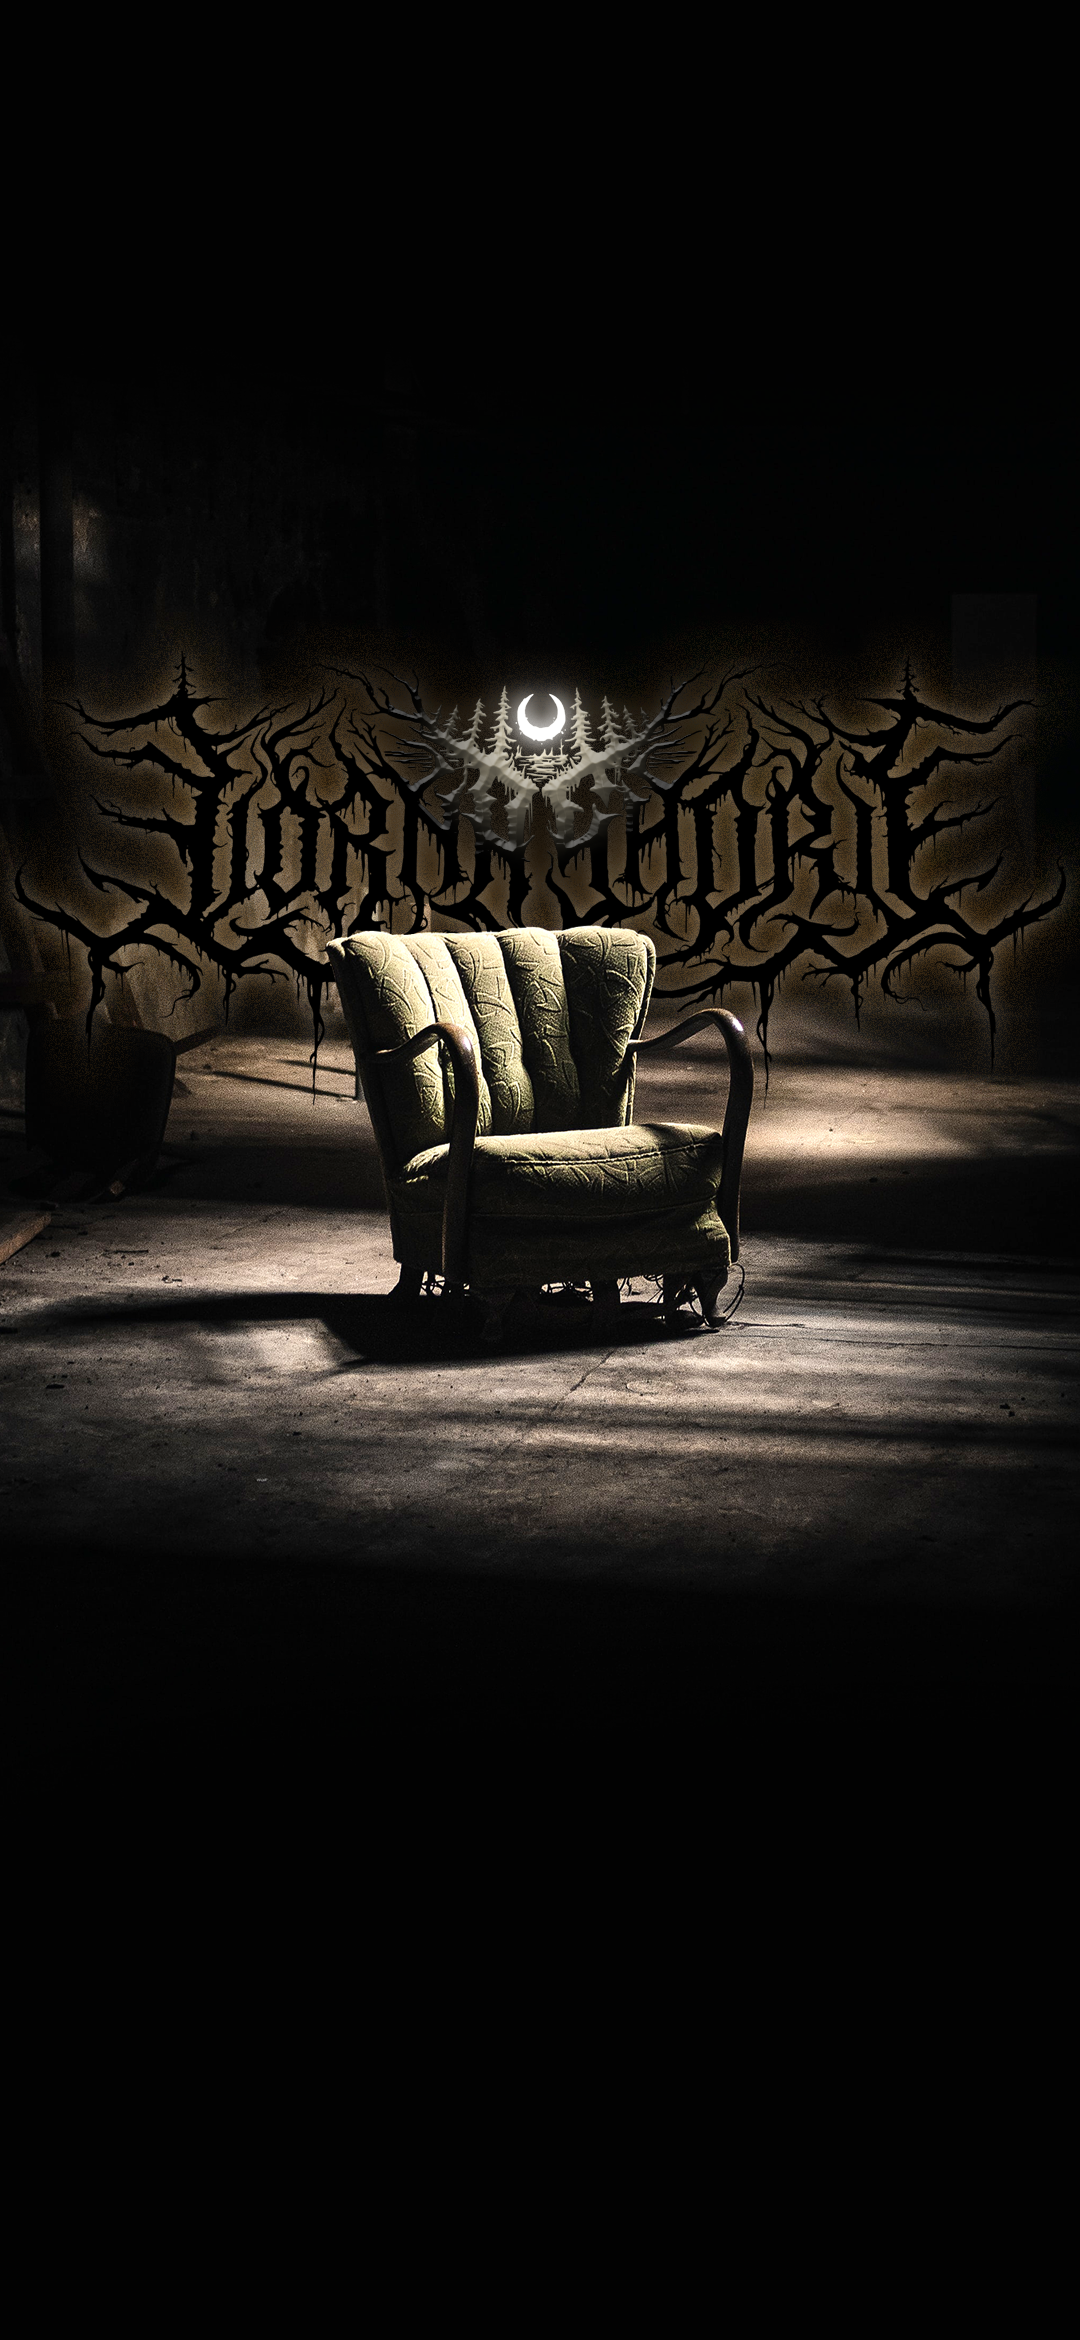 Lorna Shore Deathcore Abandoned Chair 1080x2340